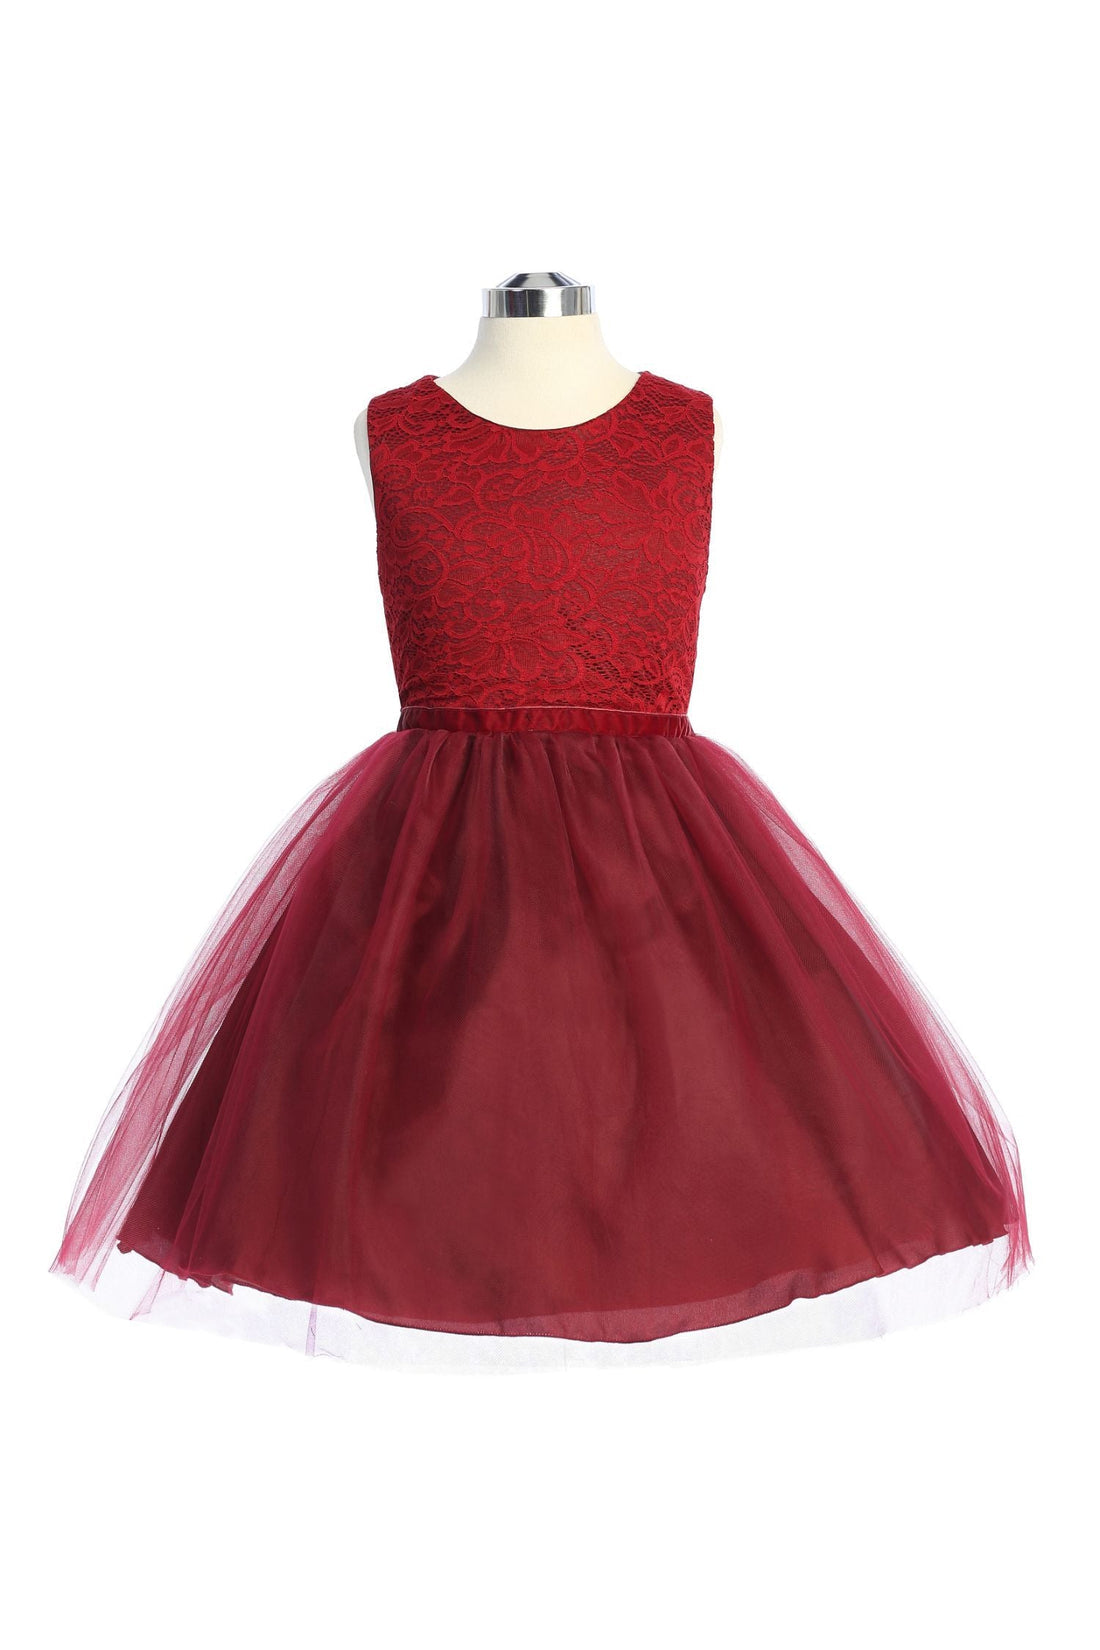 Stretch Lace Tulle Velvet Trim Girl Party Dress Plus Size by AS528+ Kids  Dream - Girl Formal Dresses